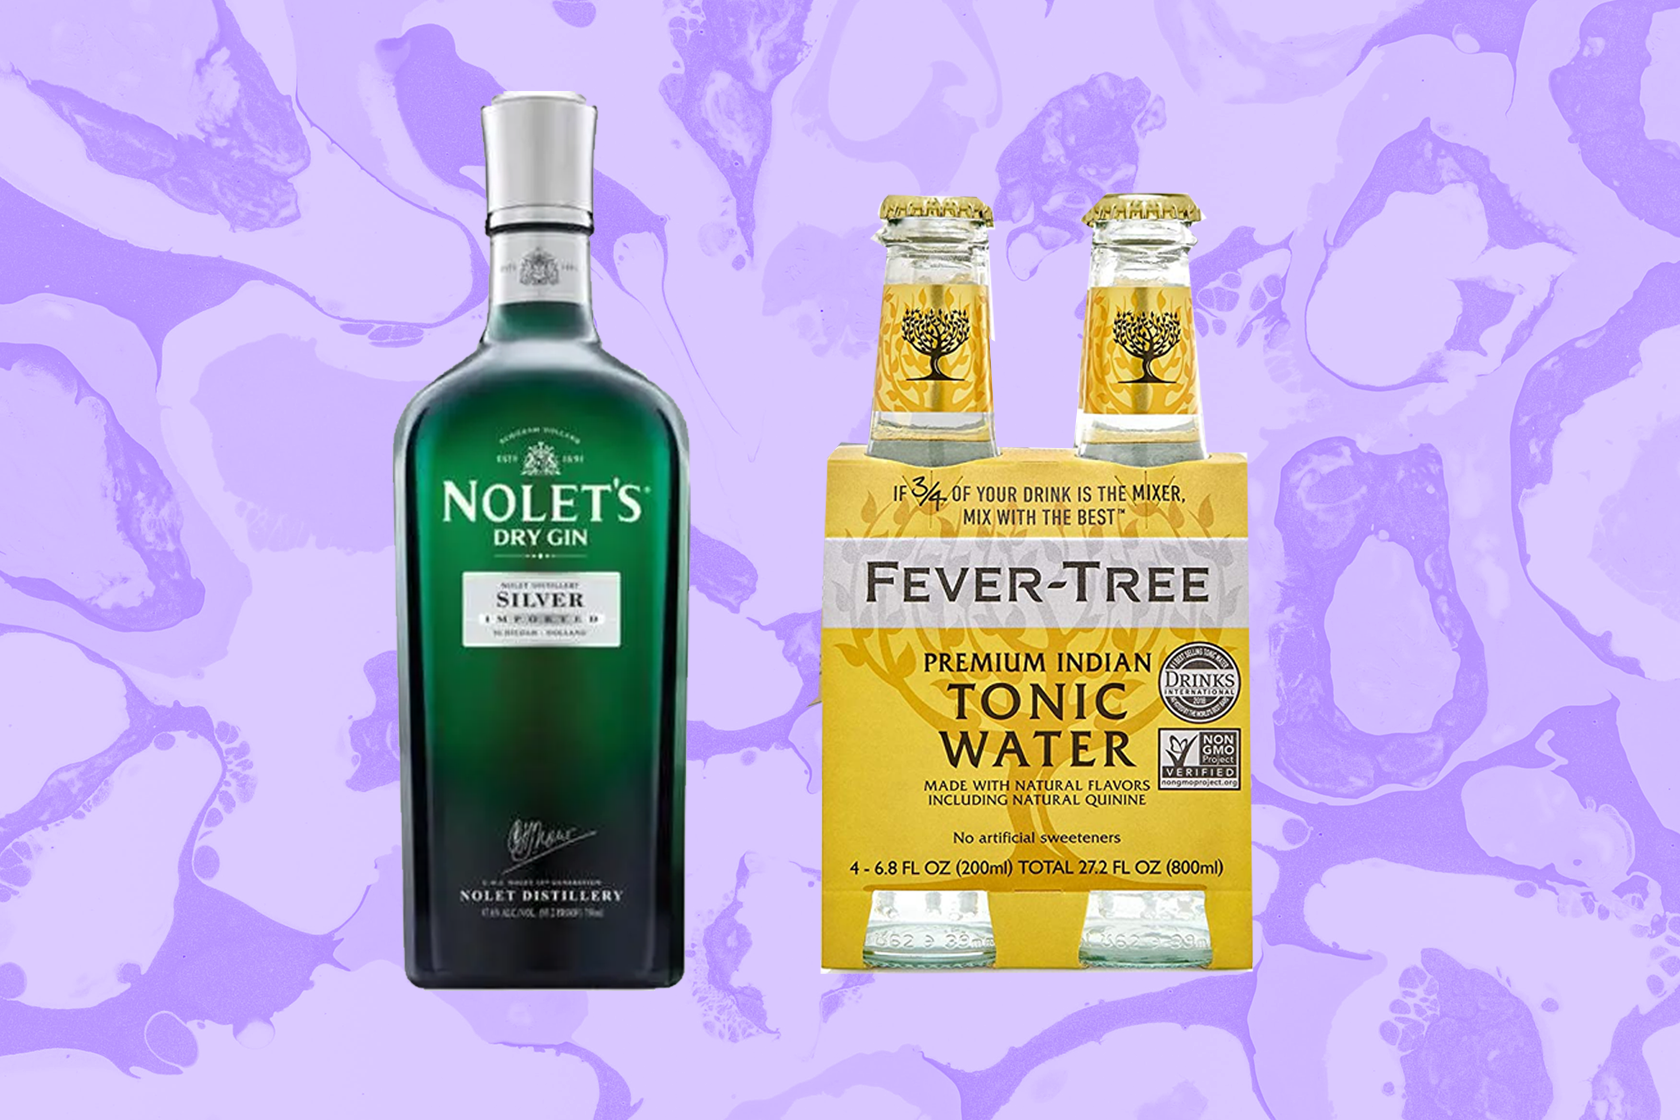 Perfect gin-and-tonic pairings for the holiday season